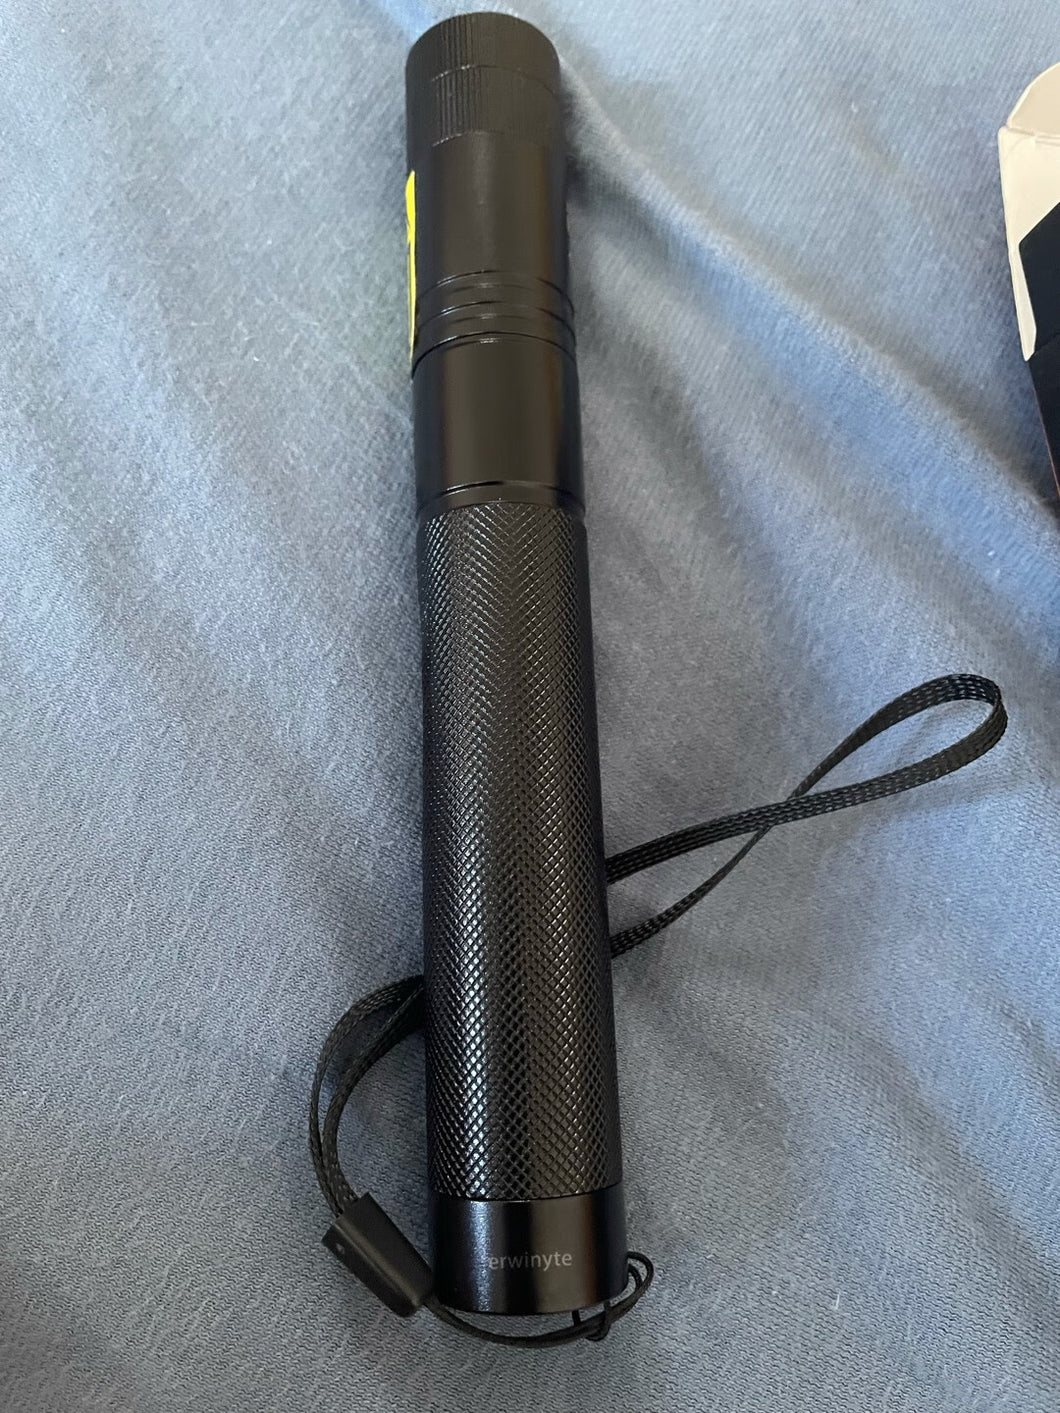 erwinyte Laser pen, rechargeable green laser pointer remote